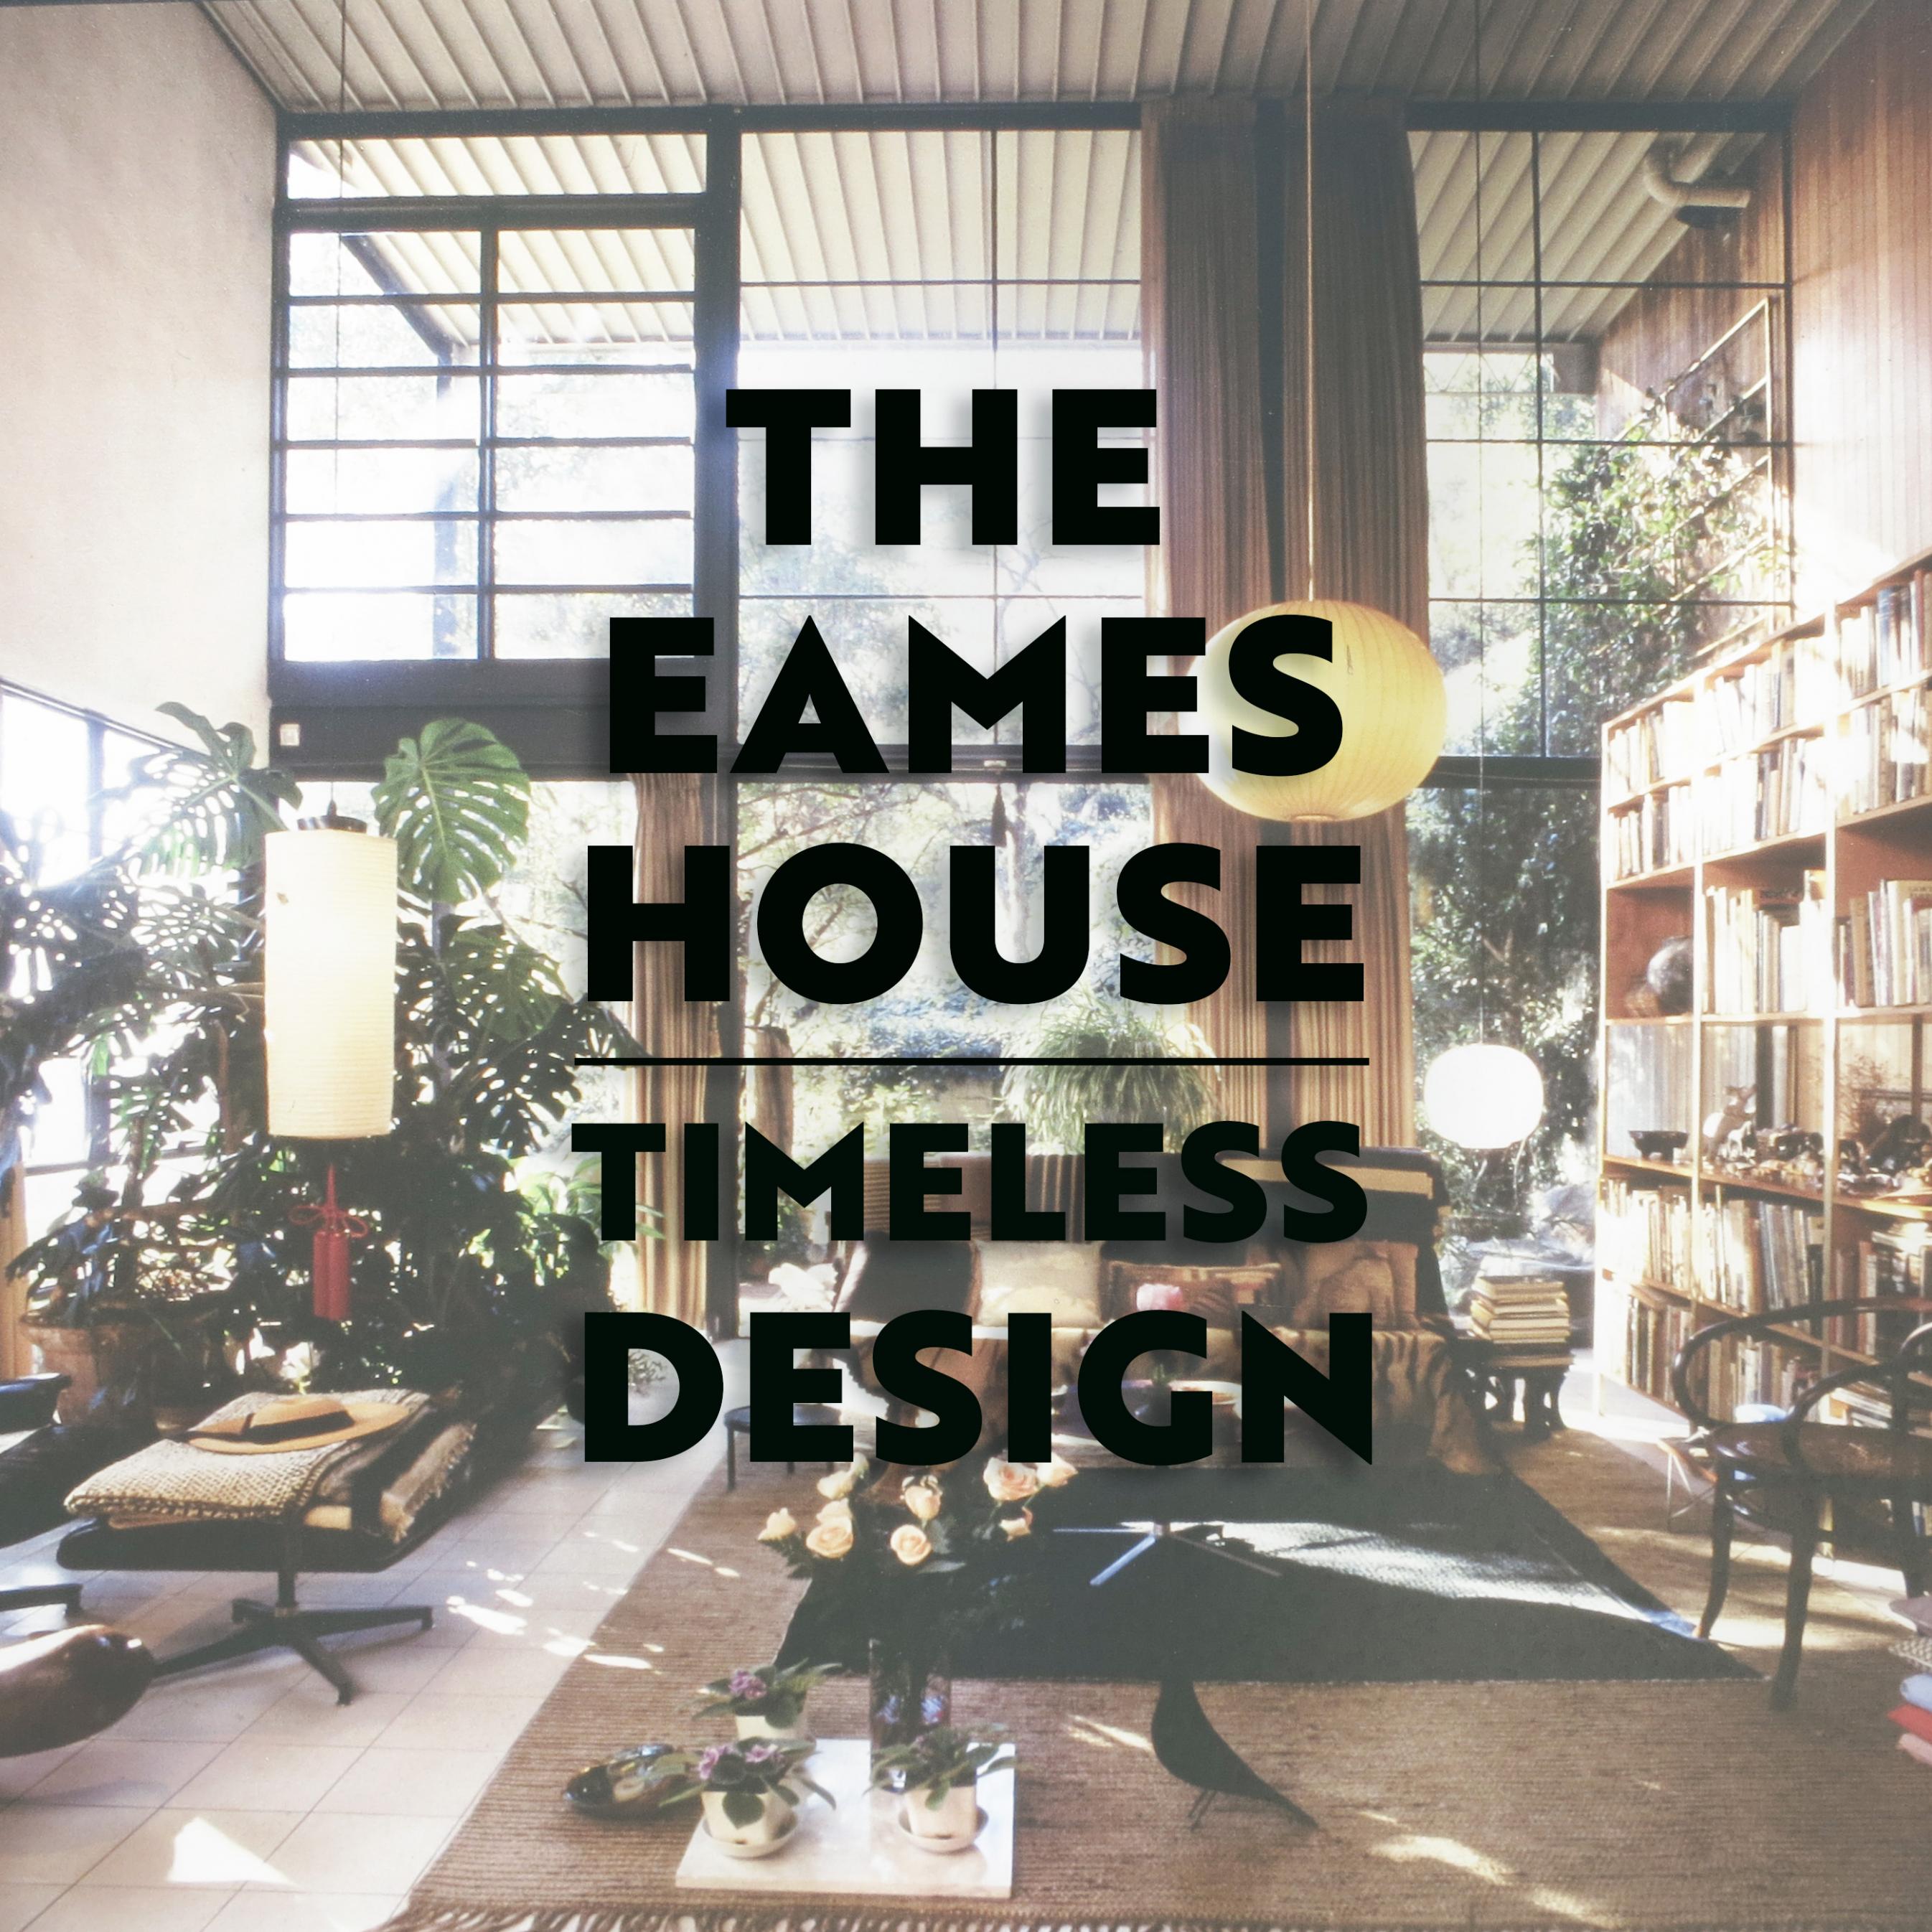 the-eames-house-timeless-design